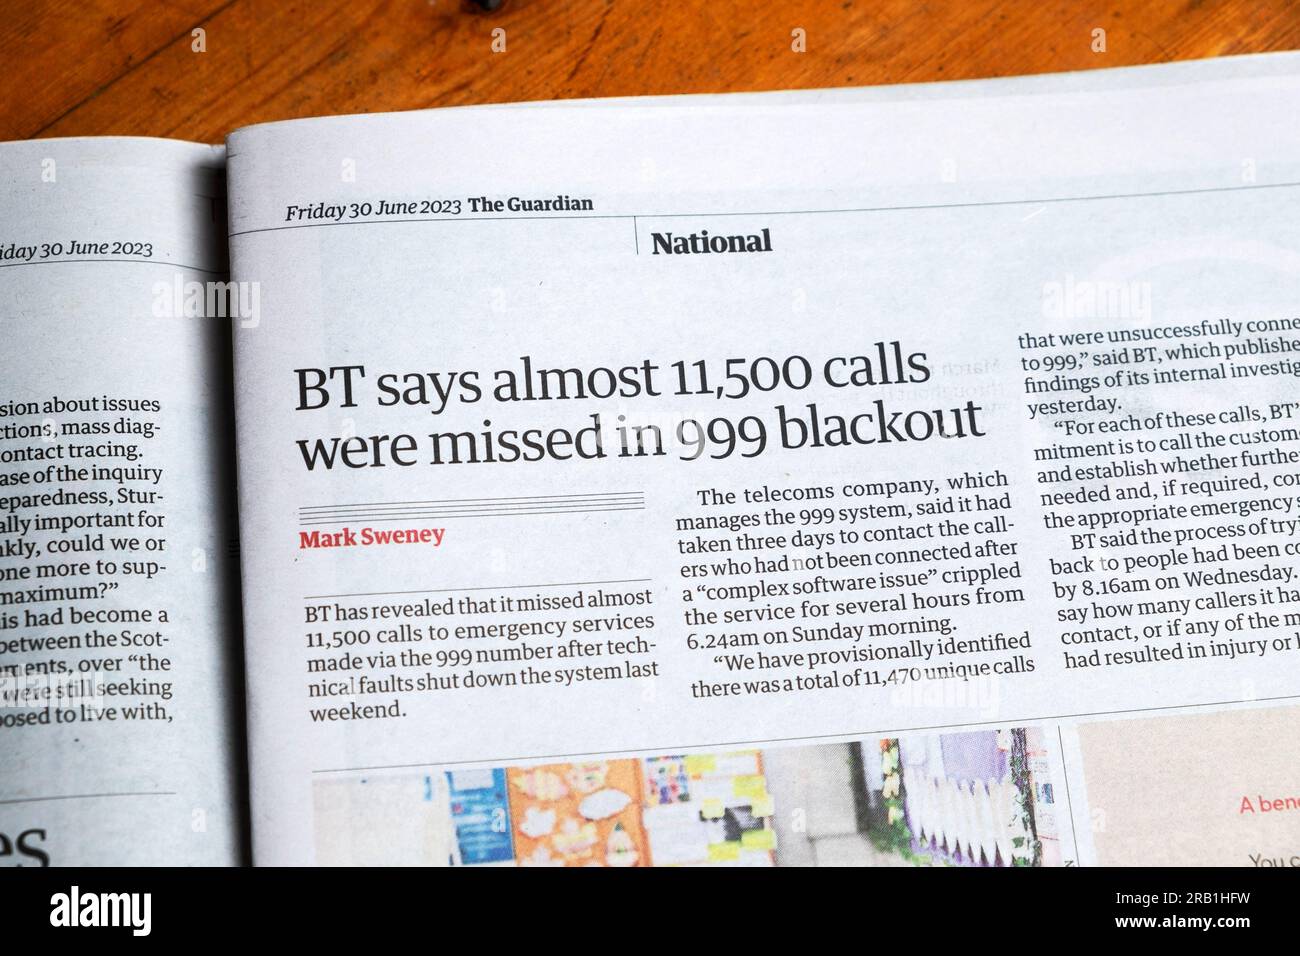 'BT says almost 11,500 calls were missed in 999 blackout' Guardian newspaper headline emergency number fault article 20 June 2023 London England UK Stock Photo